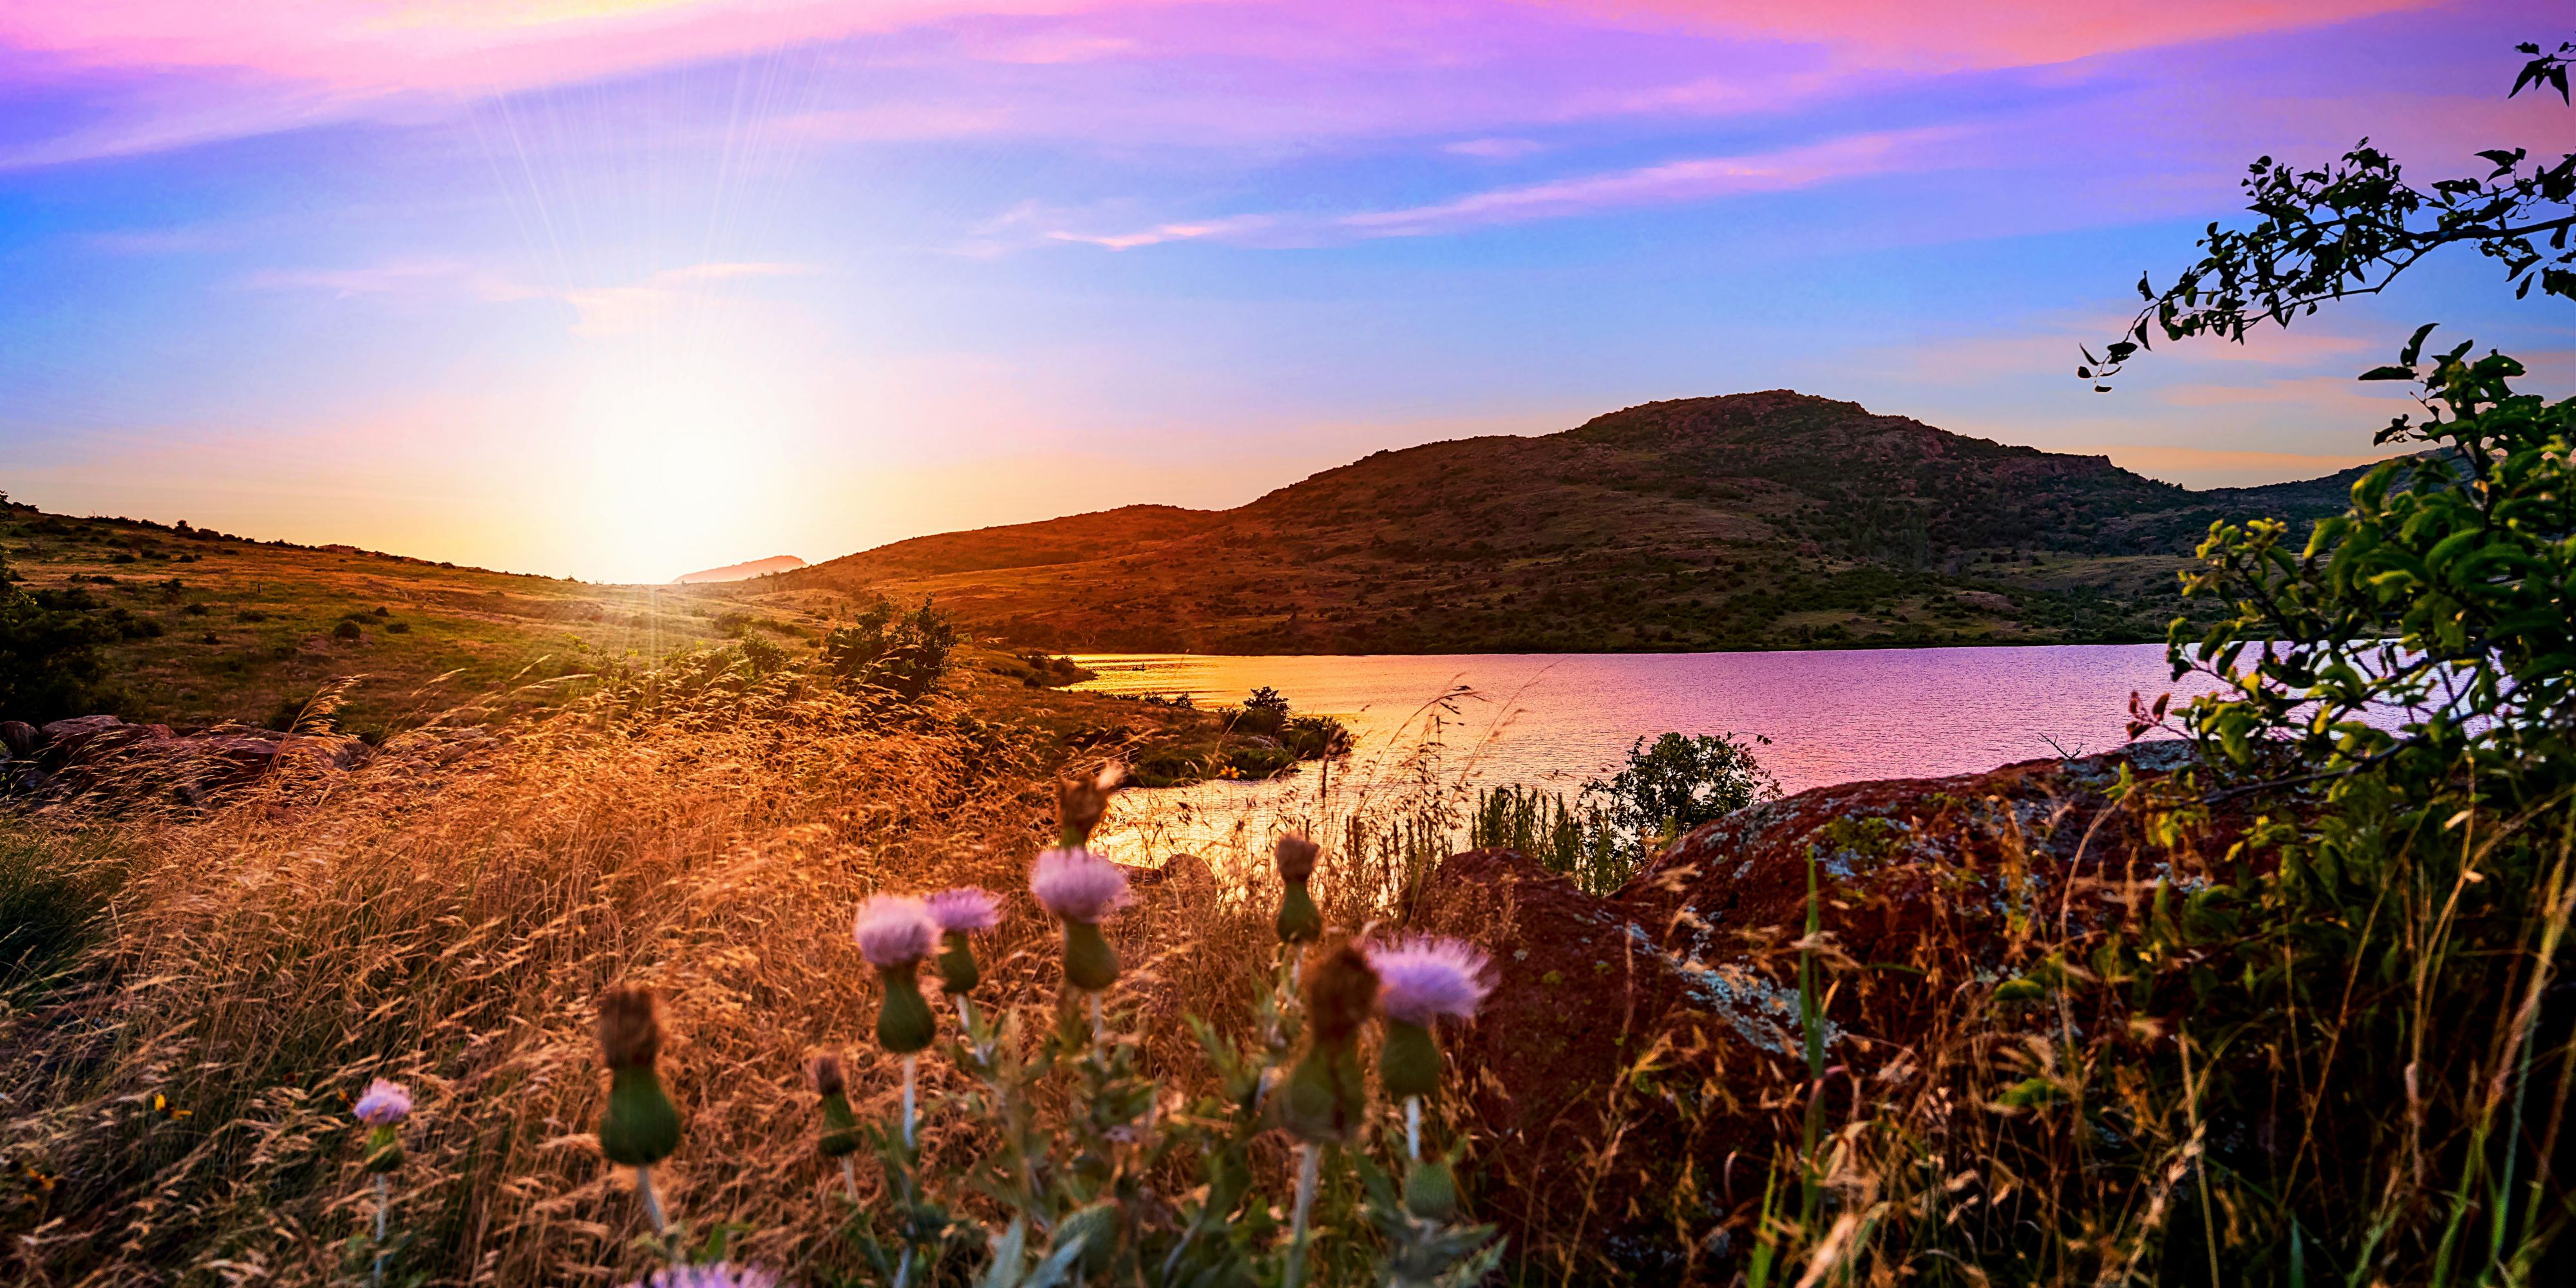 Enjoy natural beauty and fresh air abound during your stay at our hotel in Lawton with a day trip to the Wichita Mountains Wildlife Refuge.  Stop at the Visitors Center, then hike, walk or drive to take in the pristine views.